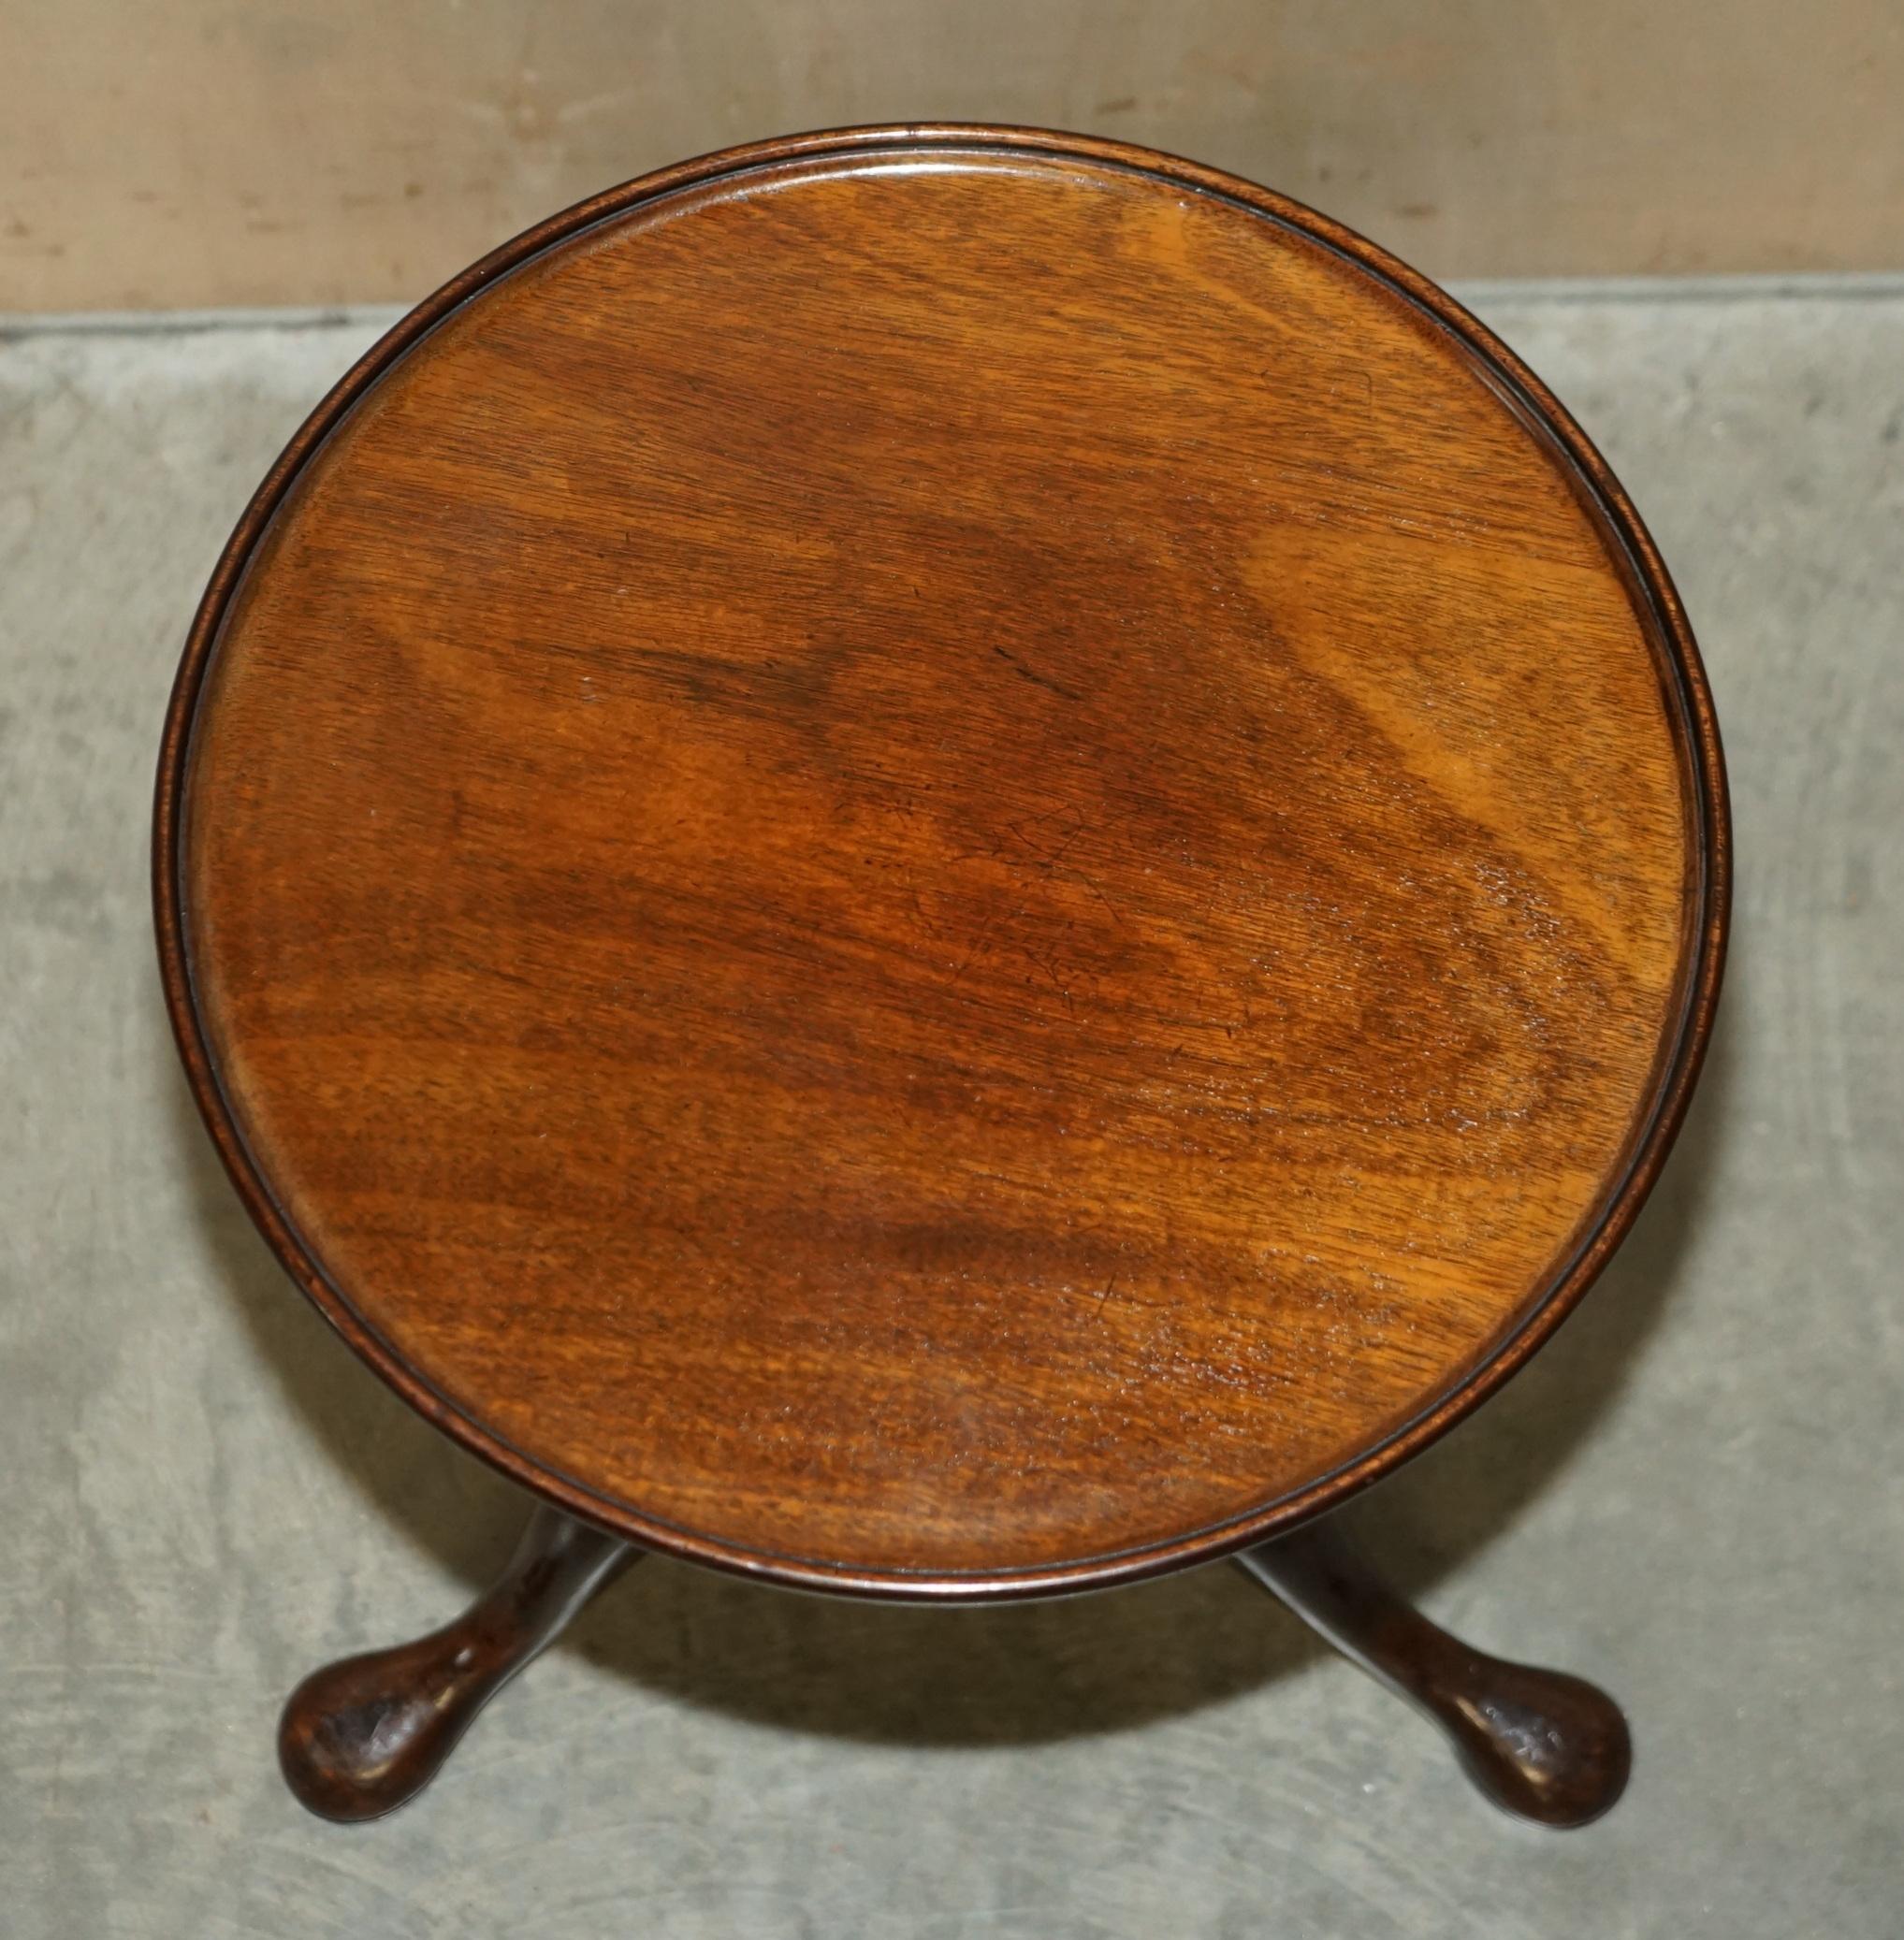 Exquisite Antique George III circa 1800 Hardwood Side Table with Spiral Column For Sale 3